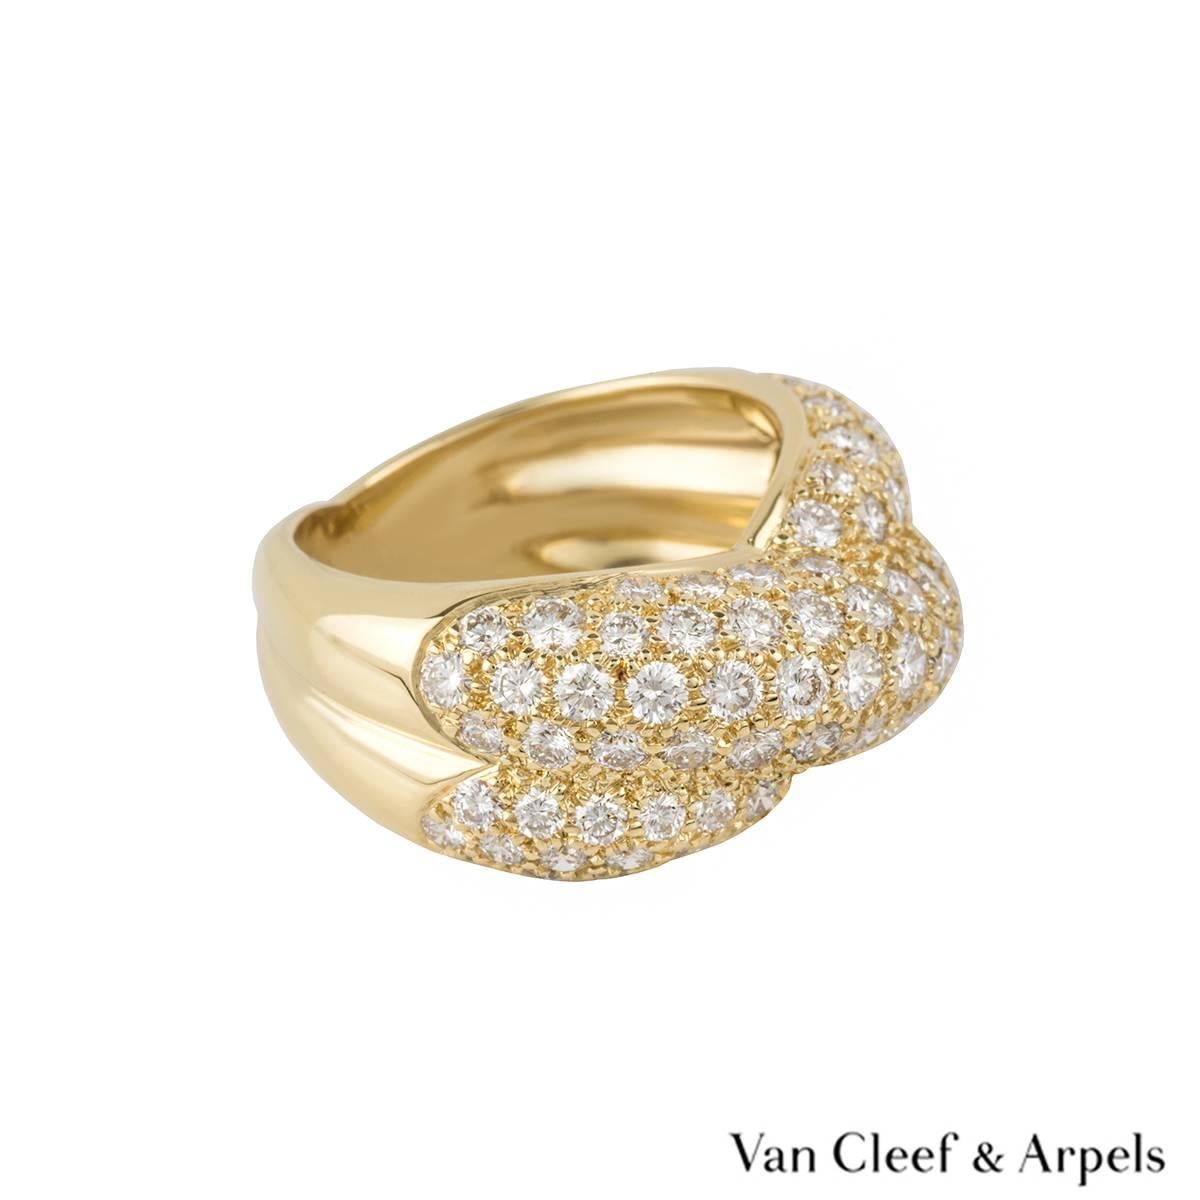 An 18k yellow gold diamond set dress ring by Van Cleef & Arpels. The ring is composed of two cross over intersections, each pave set with round brilliant cut diamonds totalling approximately 1.20ct, predominantly F/G colour and VS2 in clarity. The